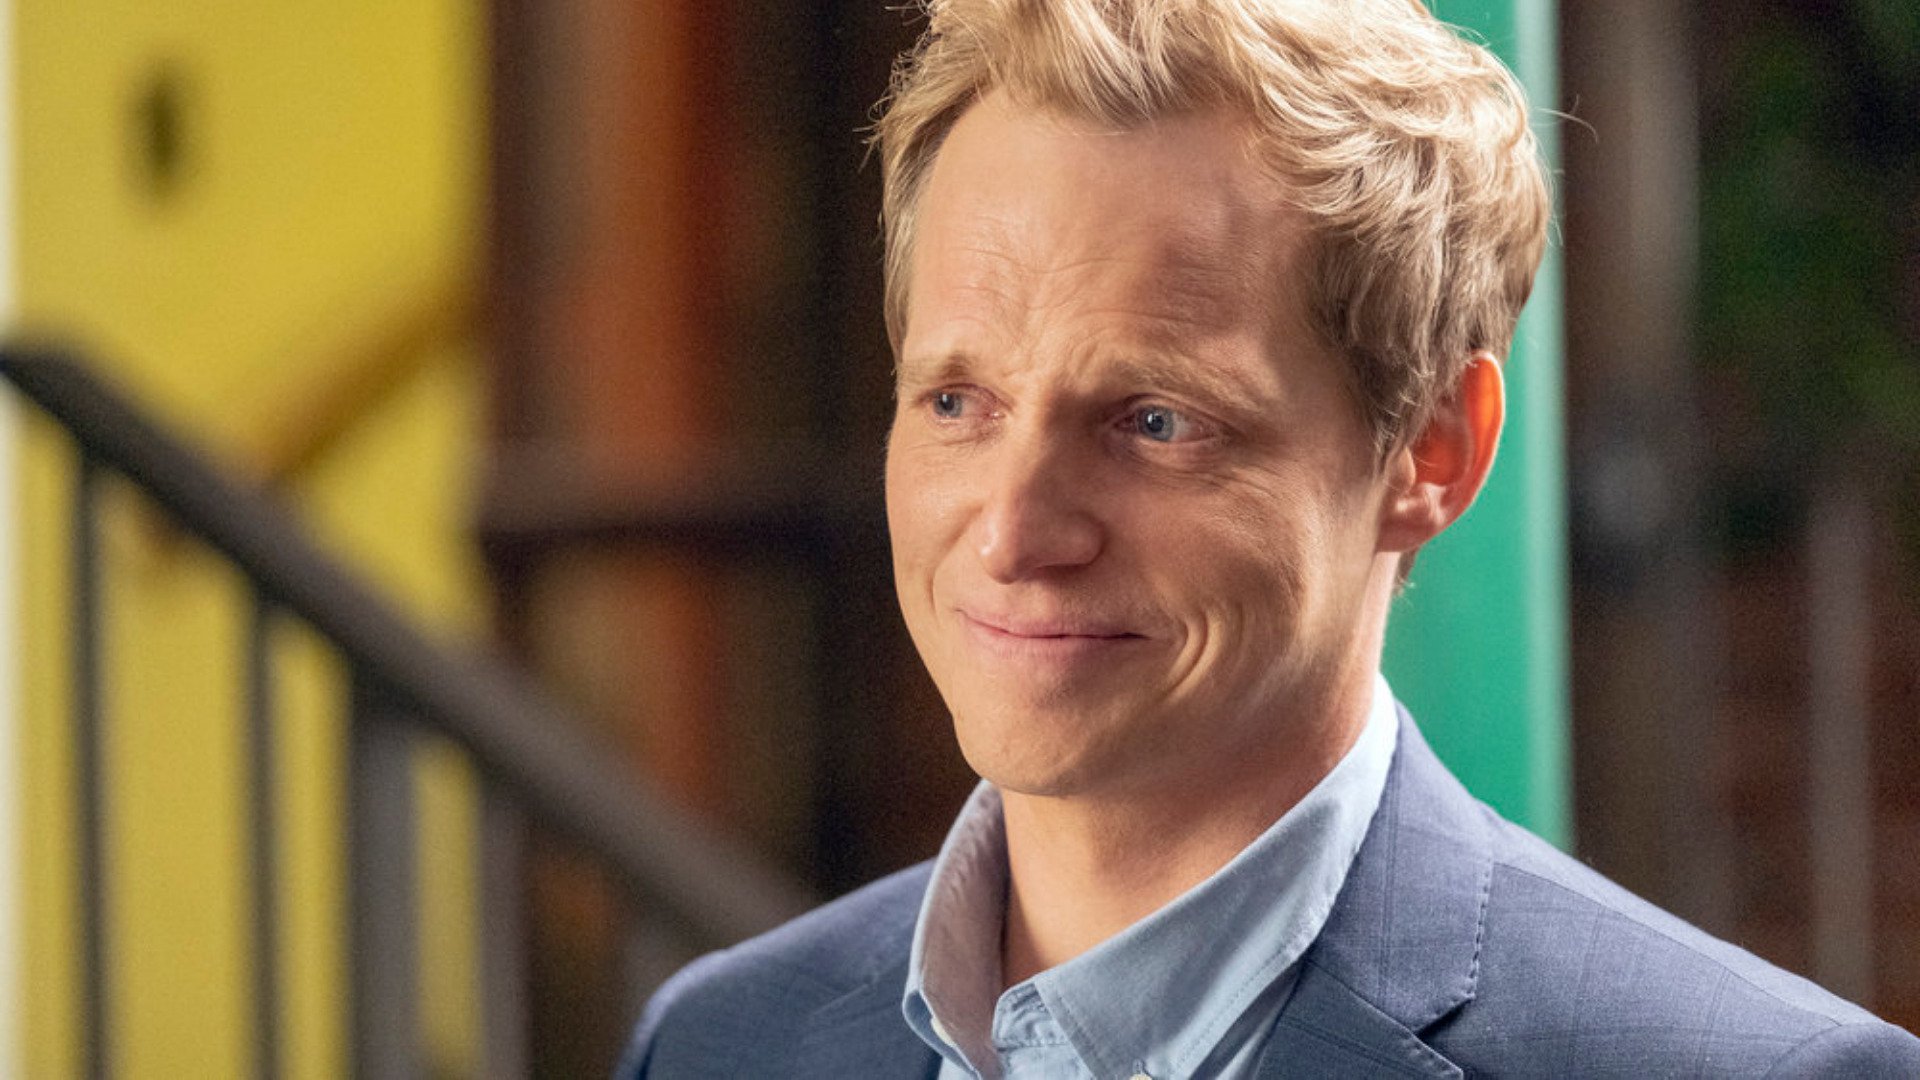 Chris Geere as Phillip smiling at Kate in ‘This Is Us’ Season 6 Episode 3